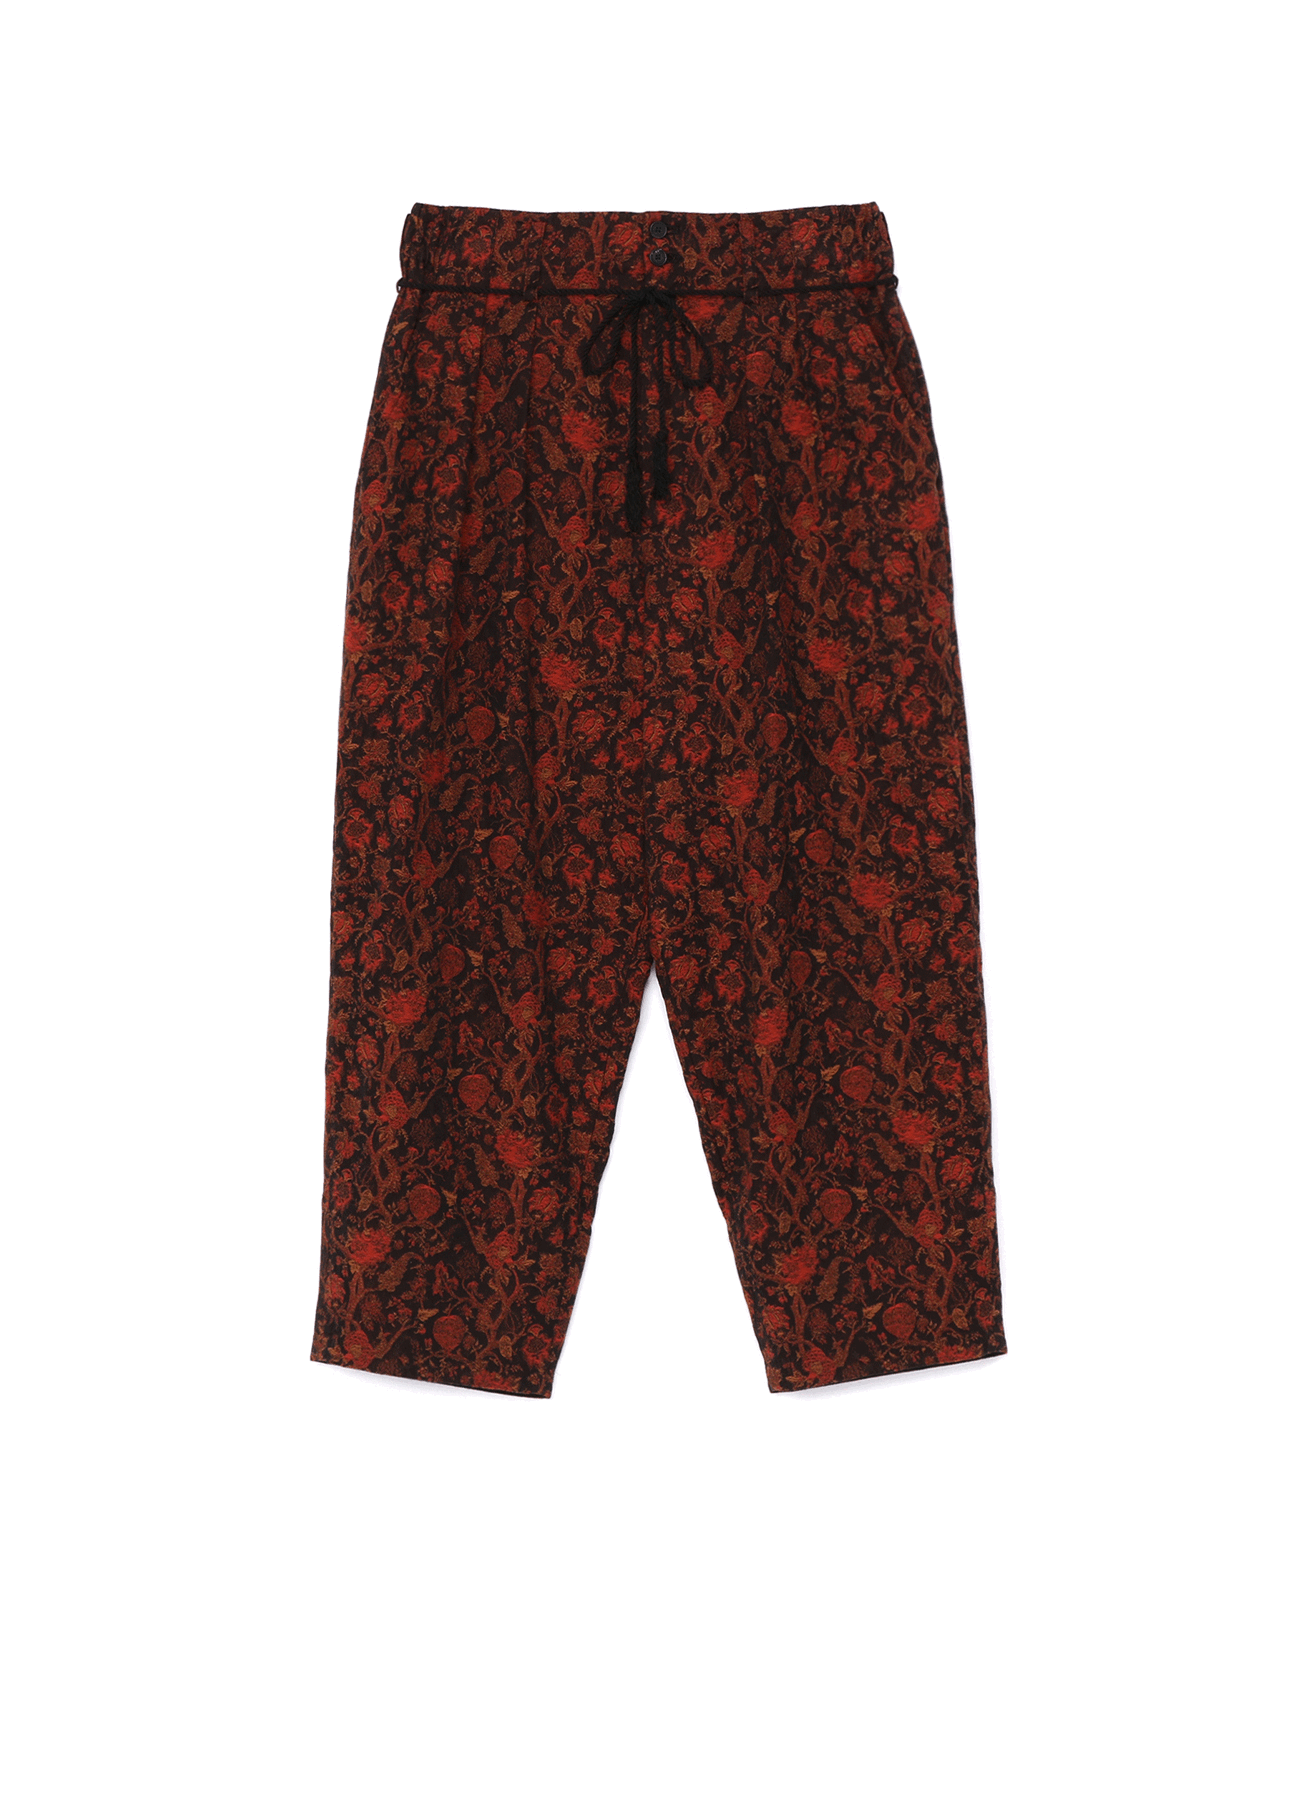 Cotton/Thorny Jacquard with Separate Hem Fabric Switching 2 Tuck pants